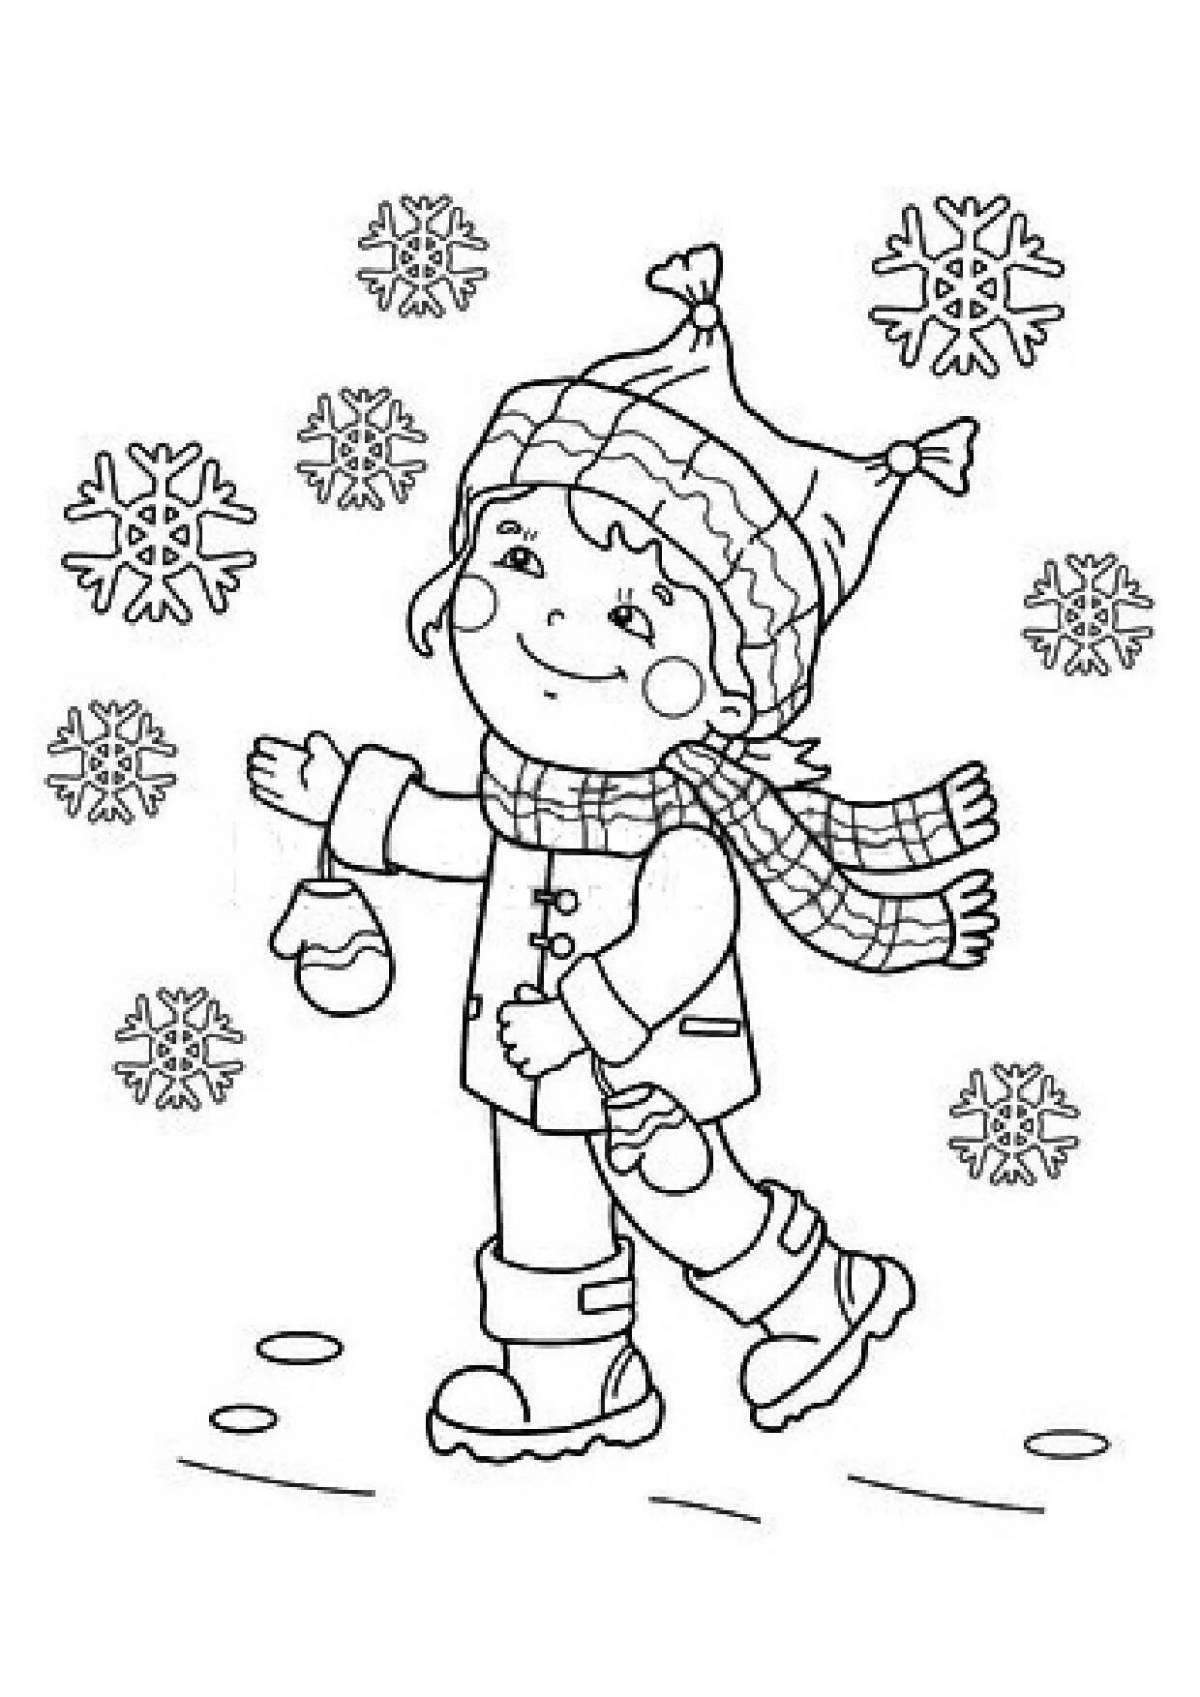 Exciting snowfall coloring book for kids